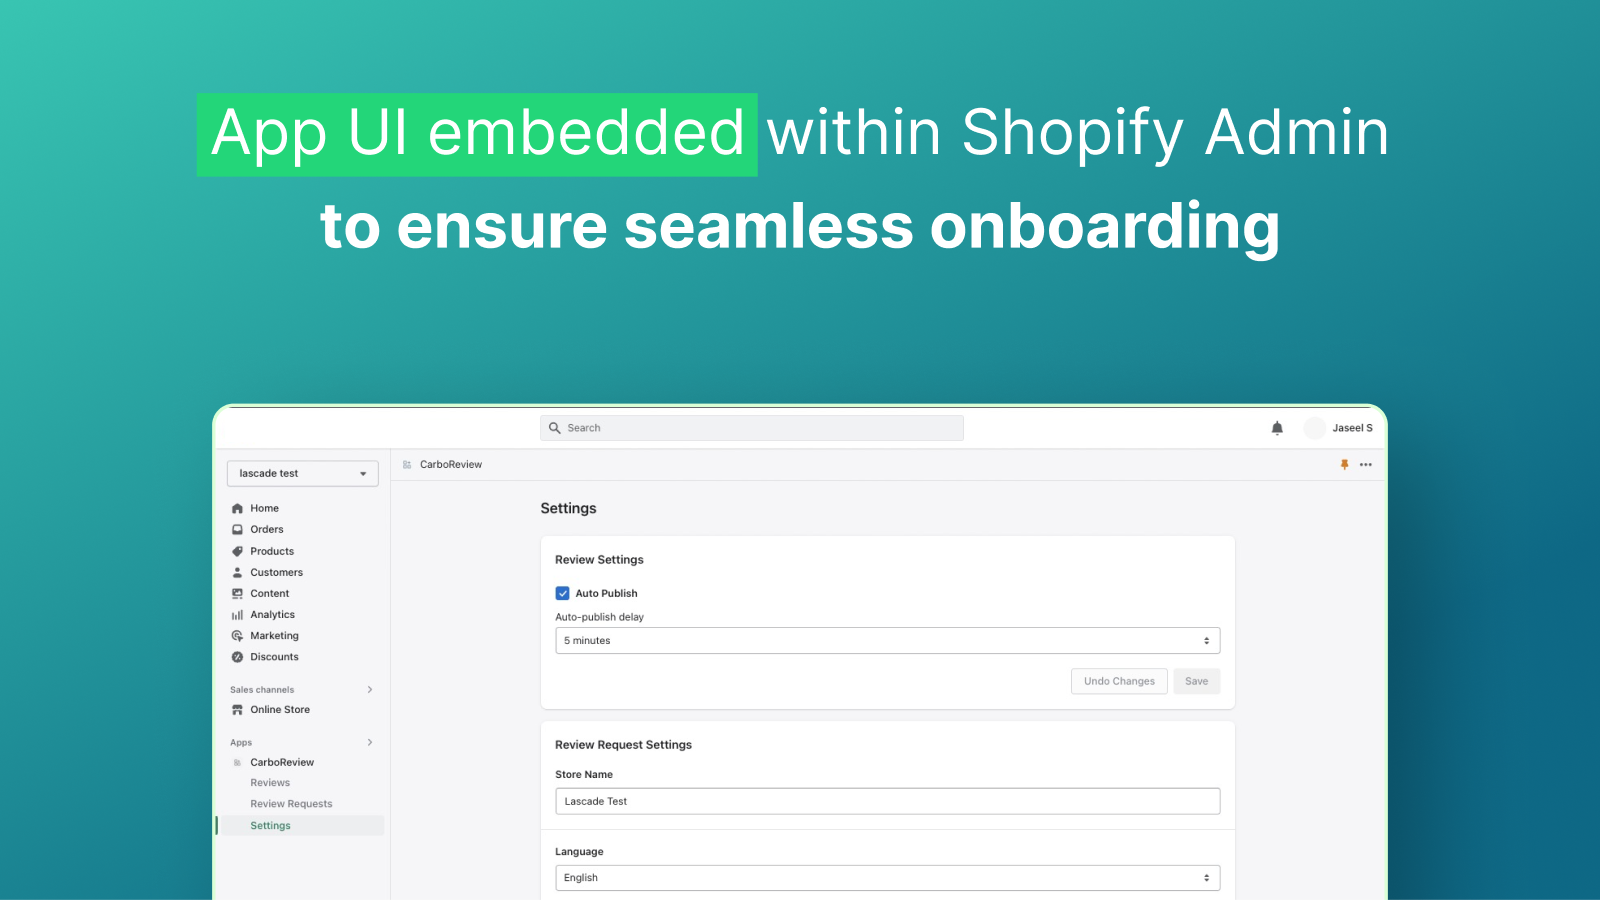 Shopify embedded UI ensures a seamless onboarding process